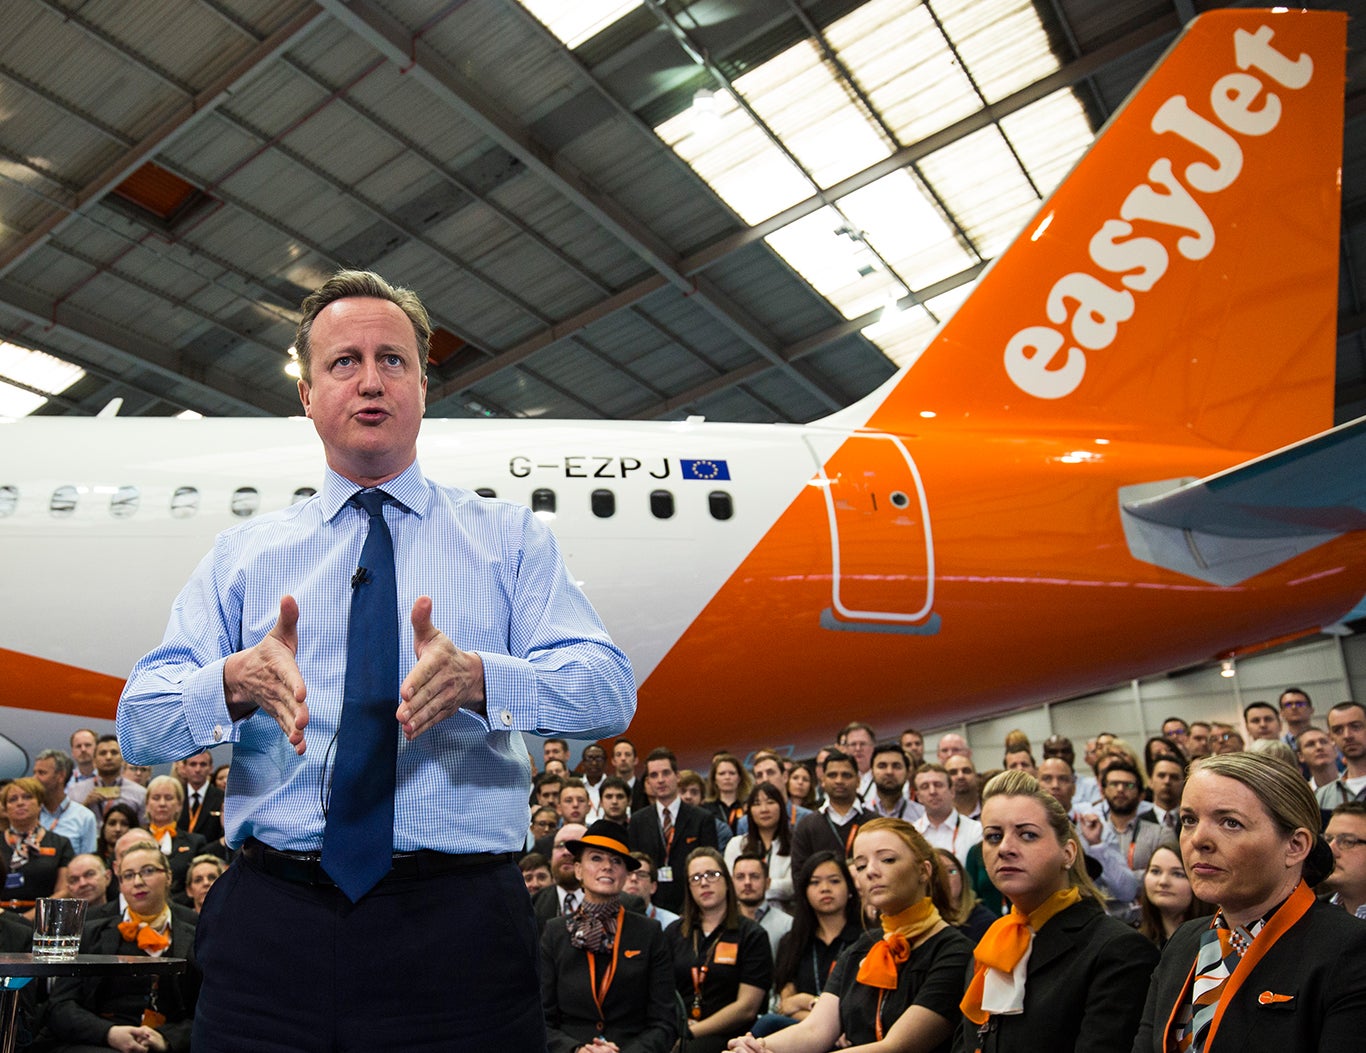 David Cameron delivers a speech to easyJet employees at the aviation company's Luton Airport Hangar on May 24, 2016 in Luton, England